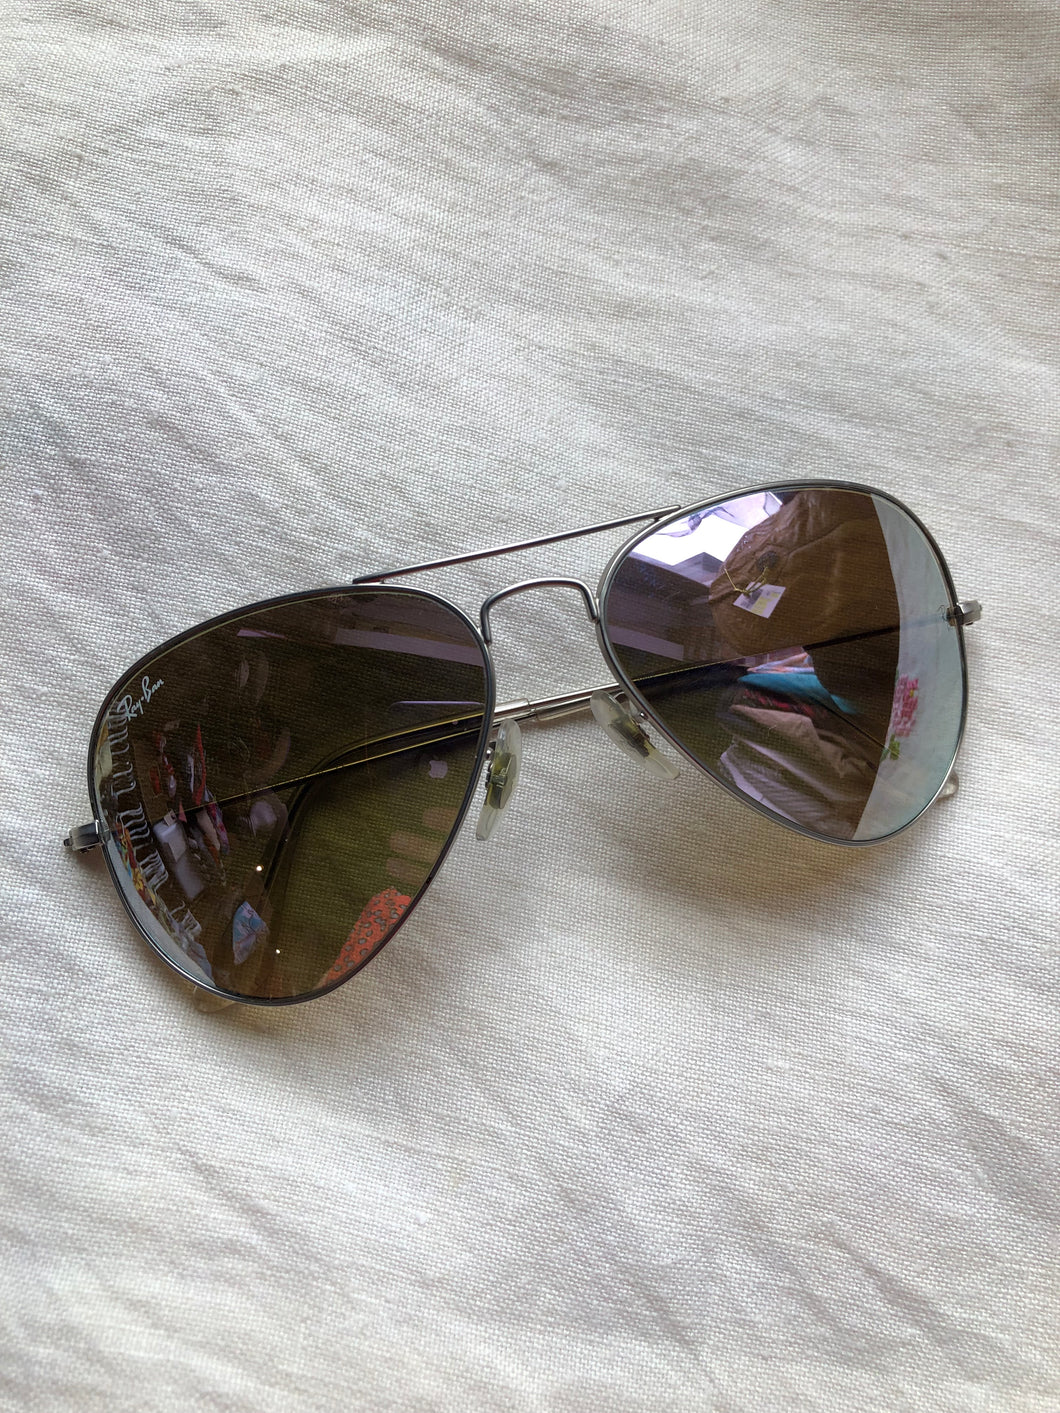 Ray-Ban Classic Aviator Sun Glasses, Made in Italy, SOLD – KingsPIER vintage